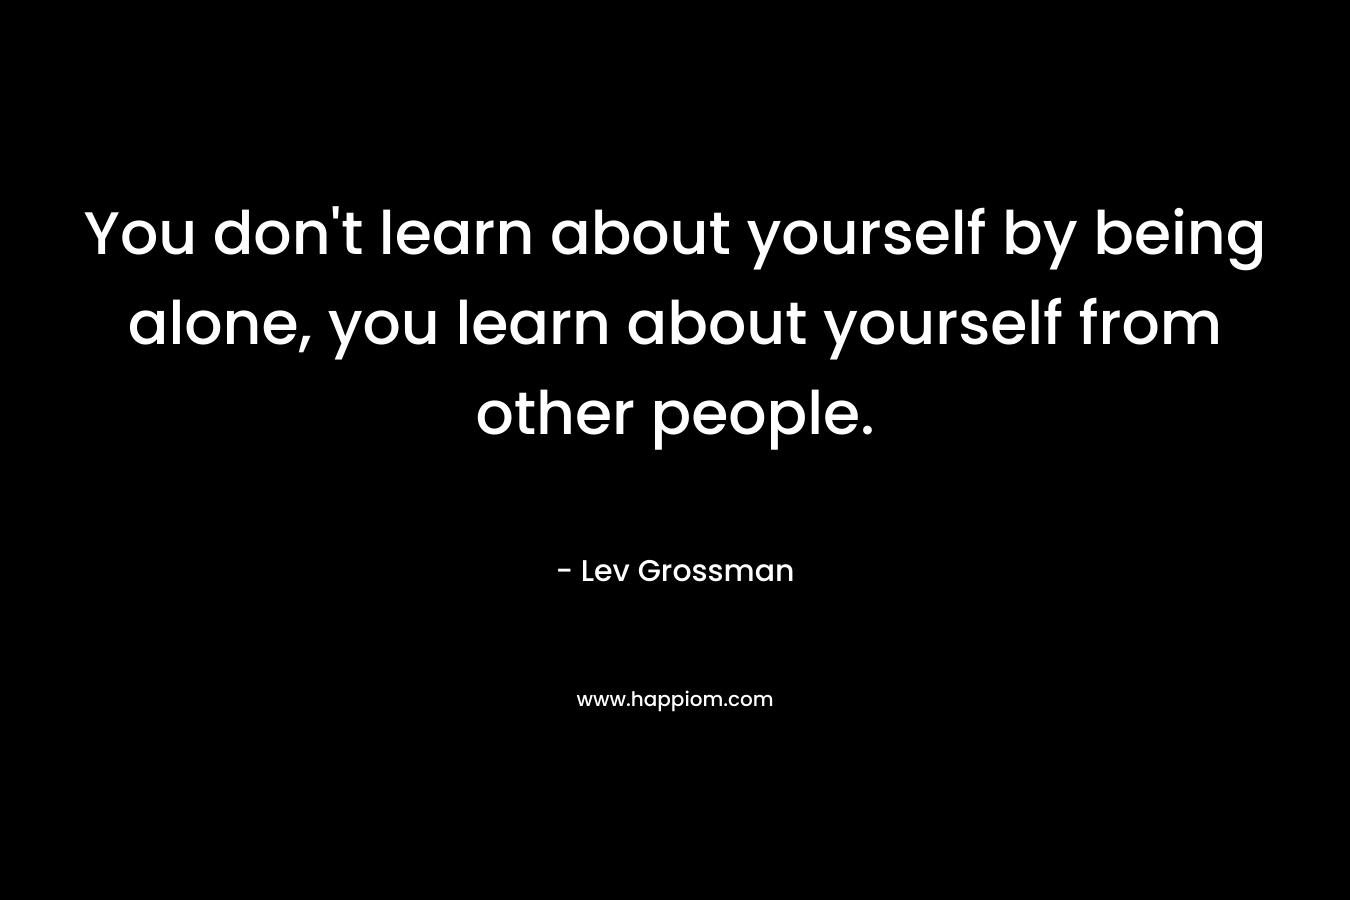 You don’t learn about yourself by being alone, you learn about yourself from other people. – Lev Grossman